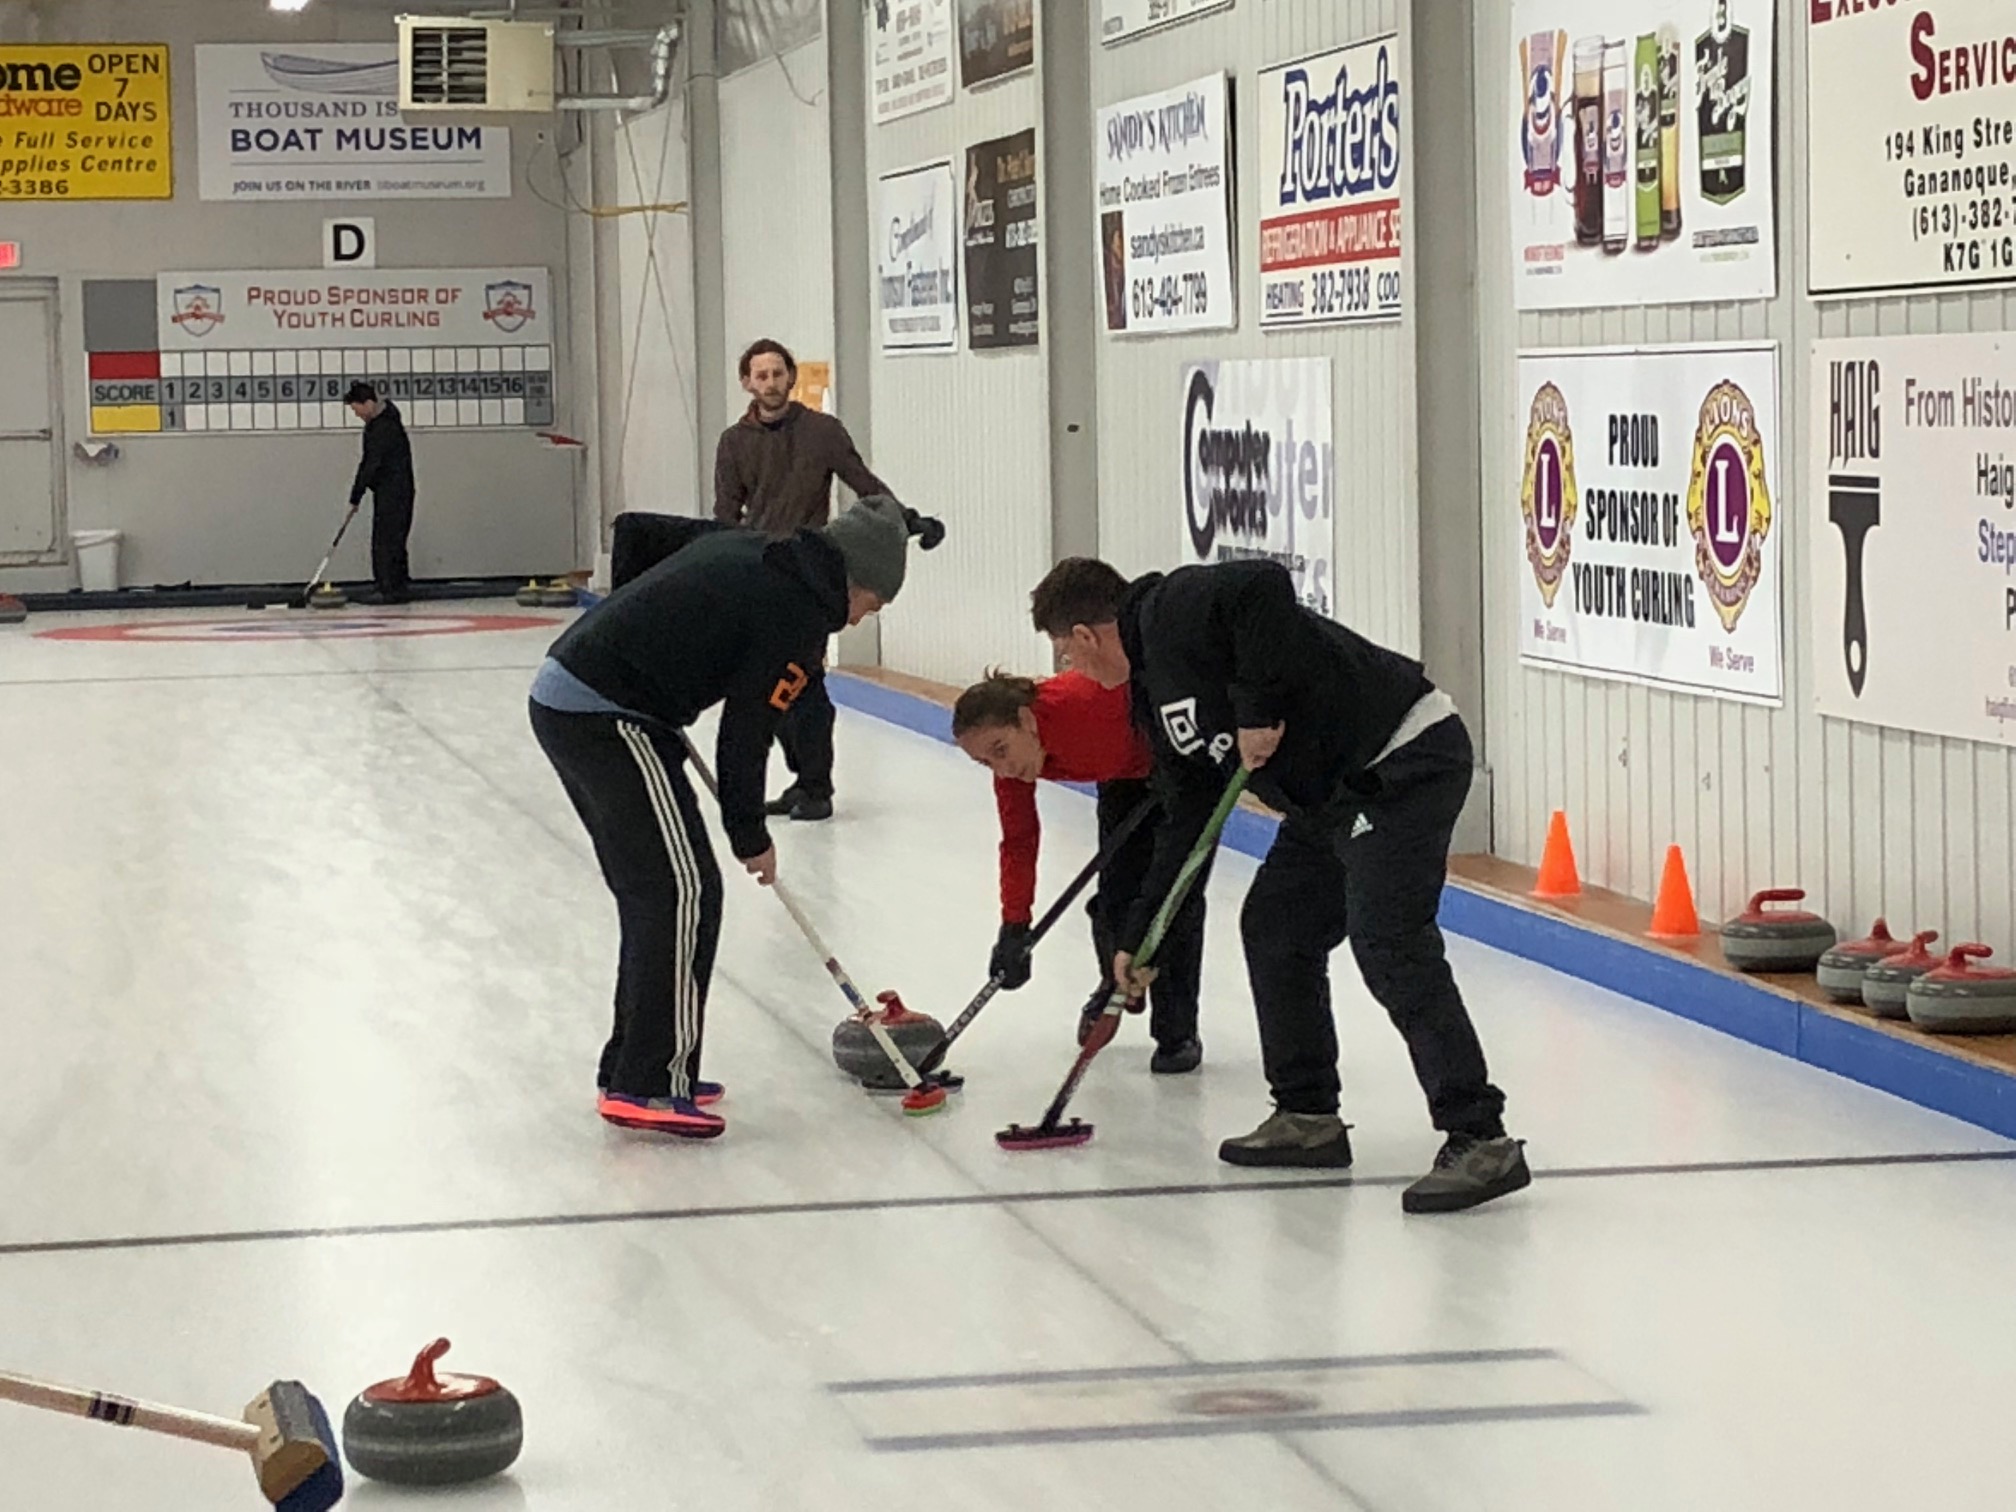 3 players curling